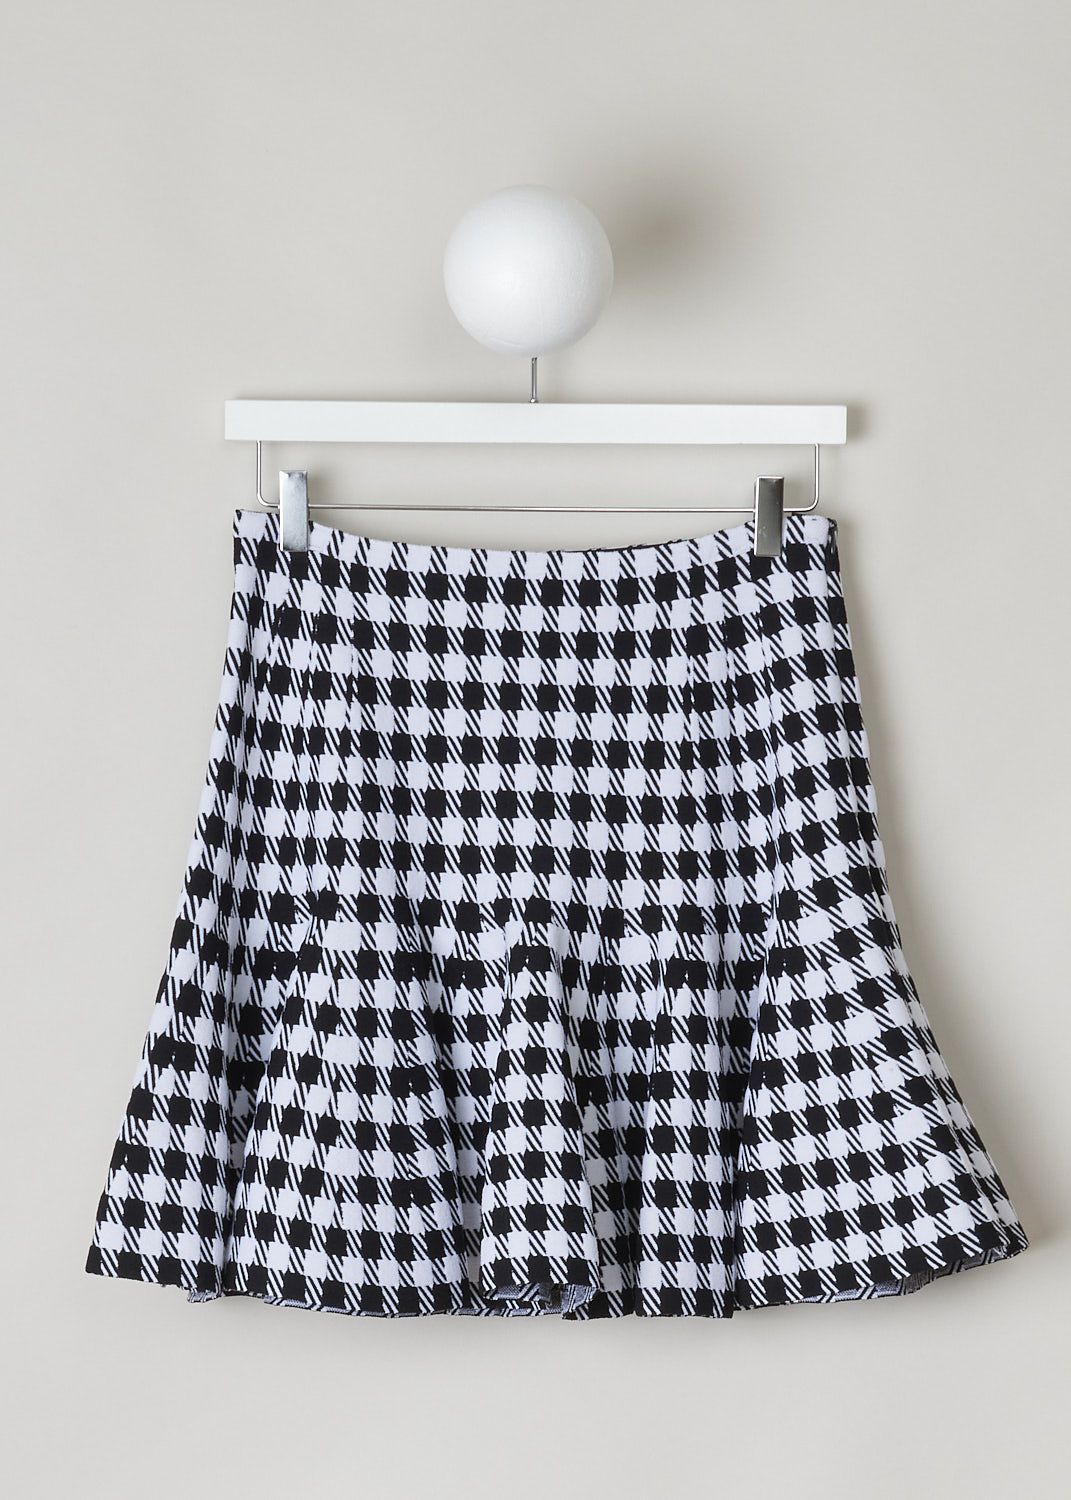 ALAÏA, FIT-AND-FLARE HOUNDSTOOTH MINI SKIRT, Black, White, Print, Front, This fit-and-flare mini skirt has a magnified black and white Houndstooth print throughout. The skirt sits high on the waist and flares out. A concealed side zip functions as the closure function. The skirt is fully elasticated.

